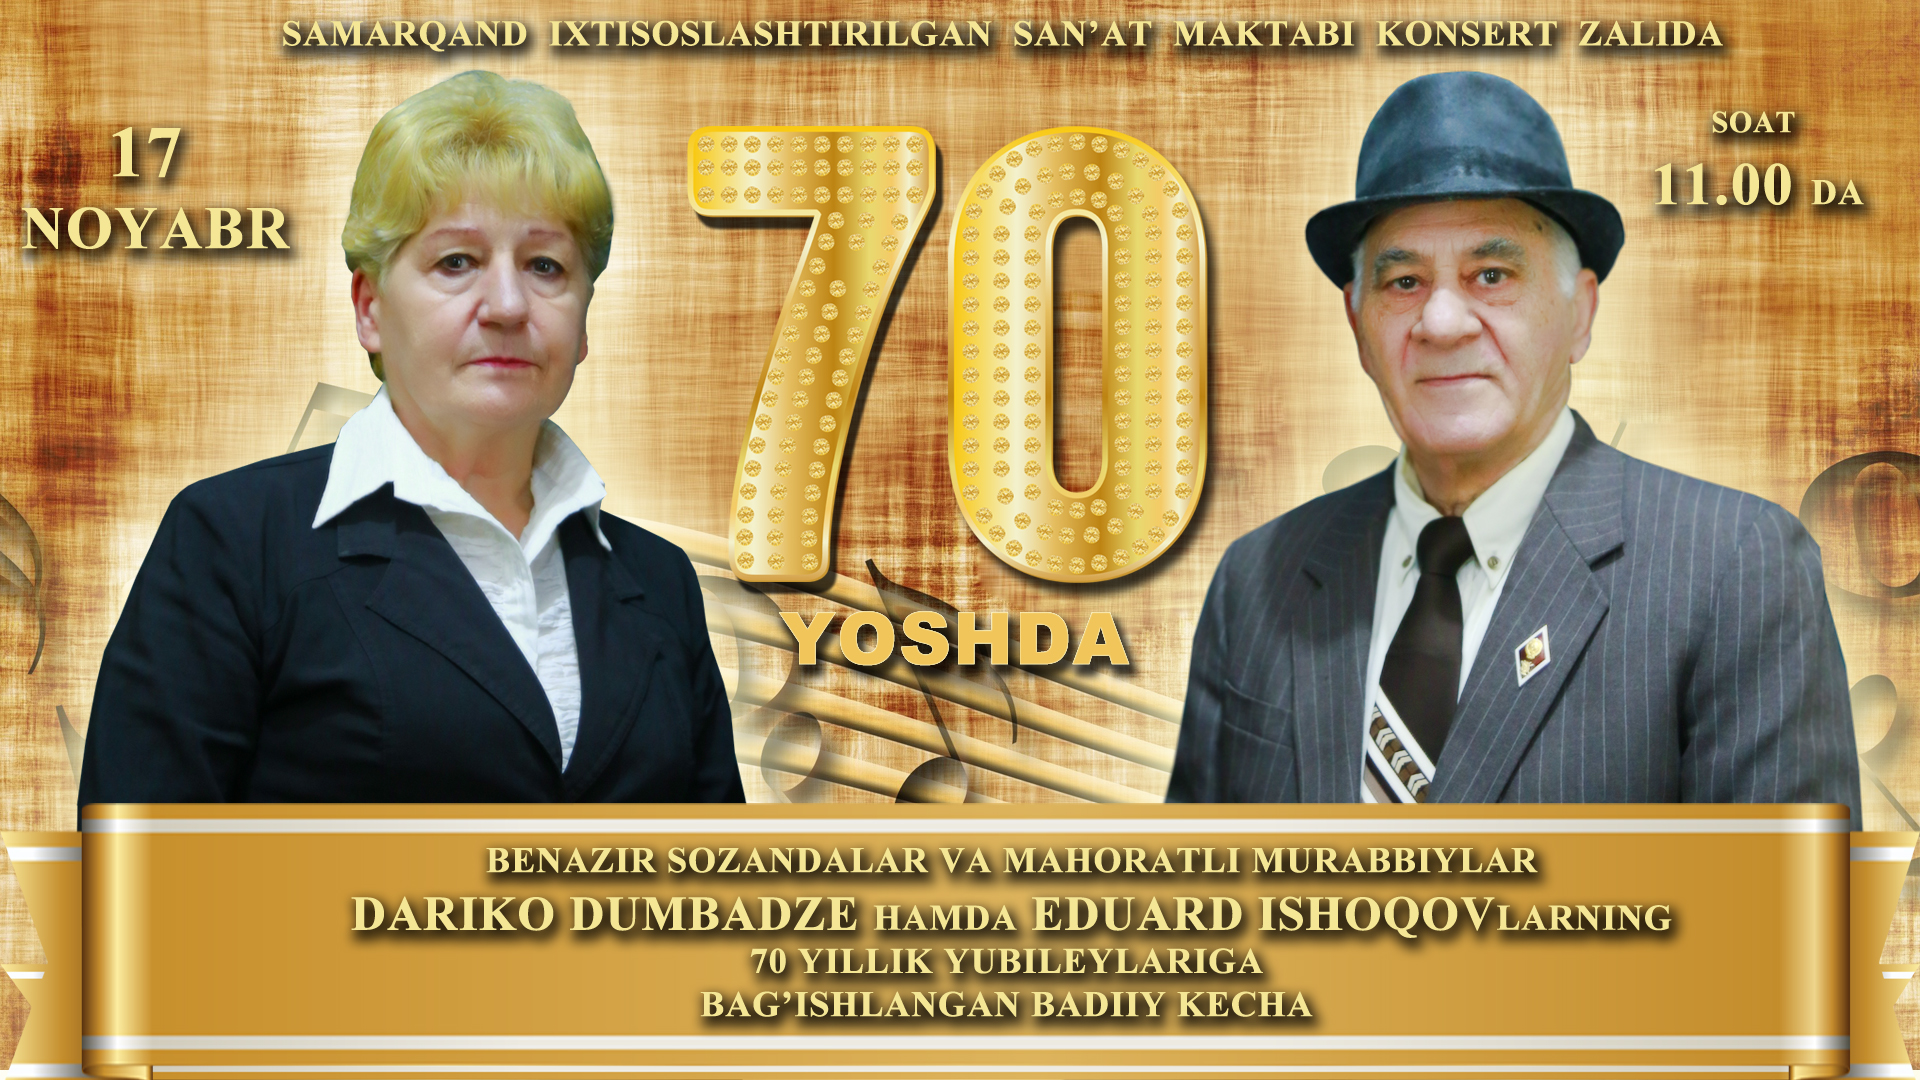 We invite you all to the anniversary evening!